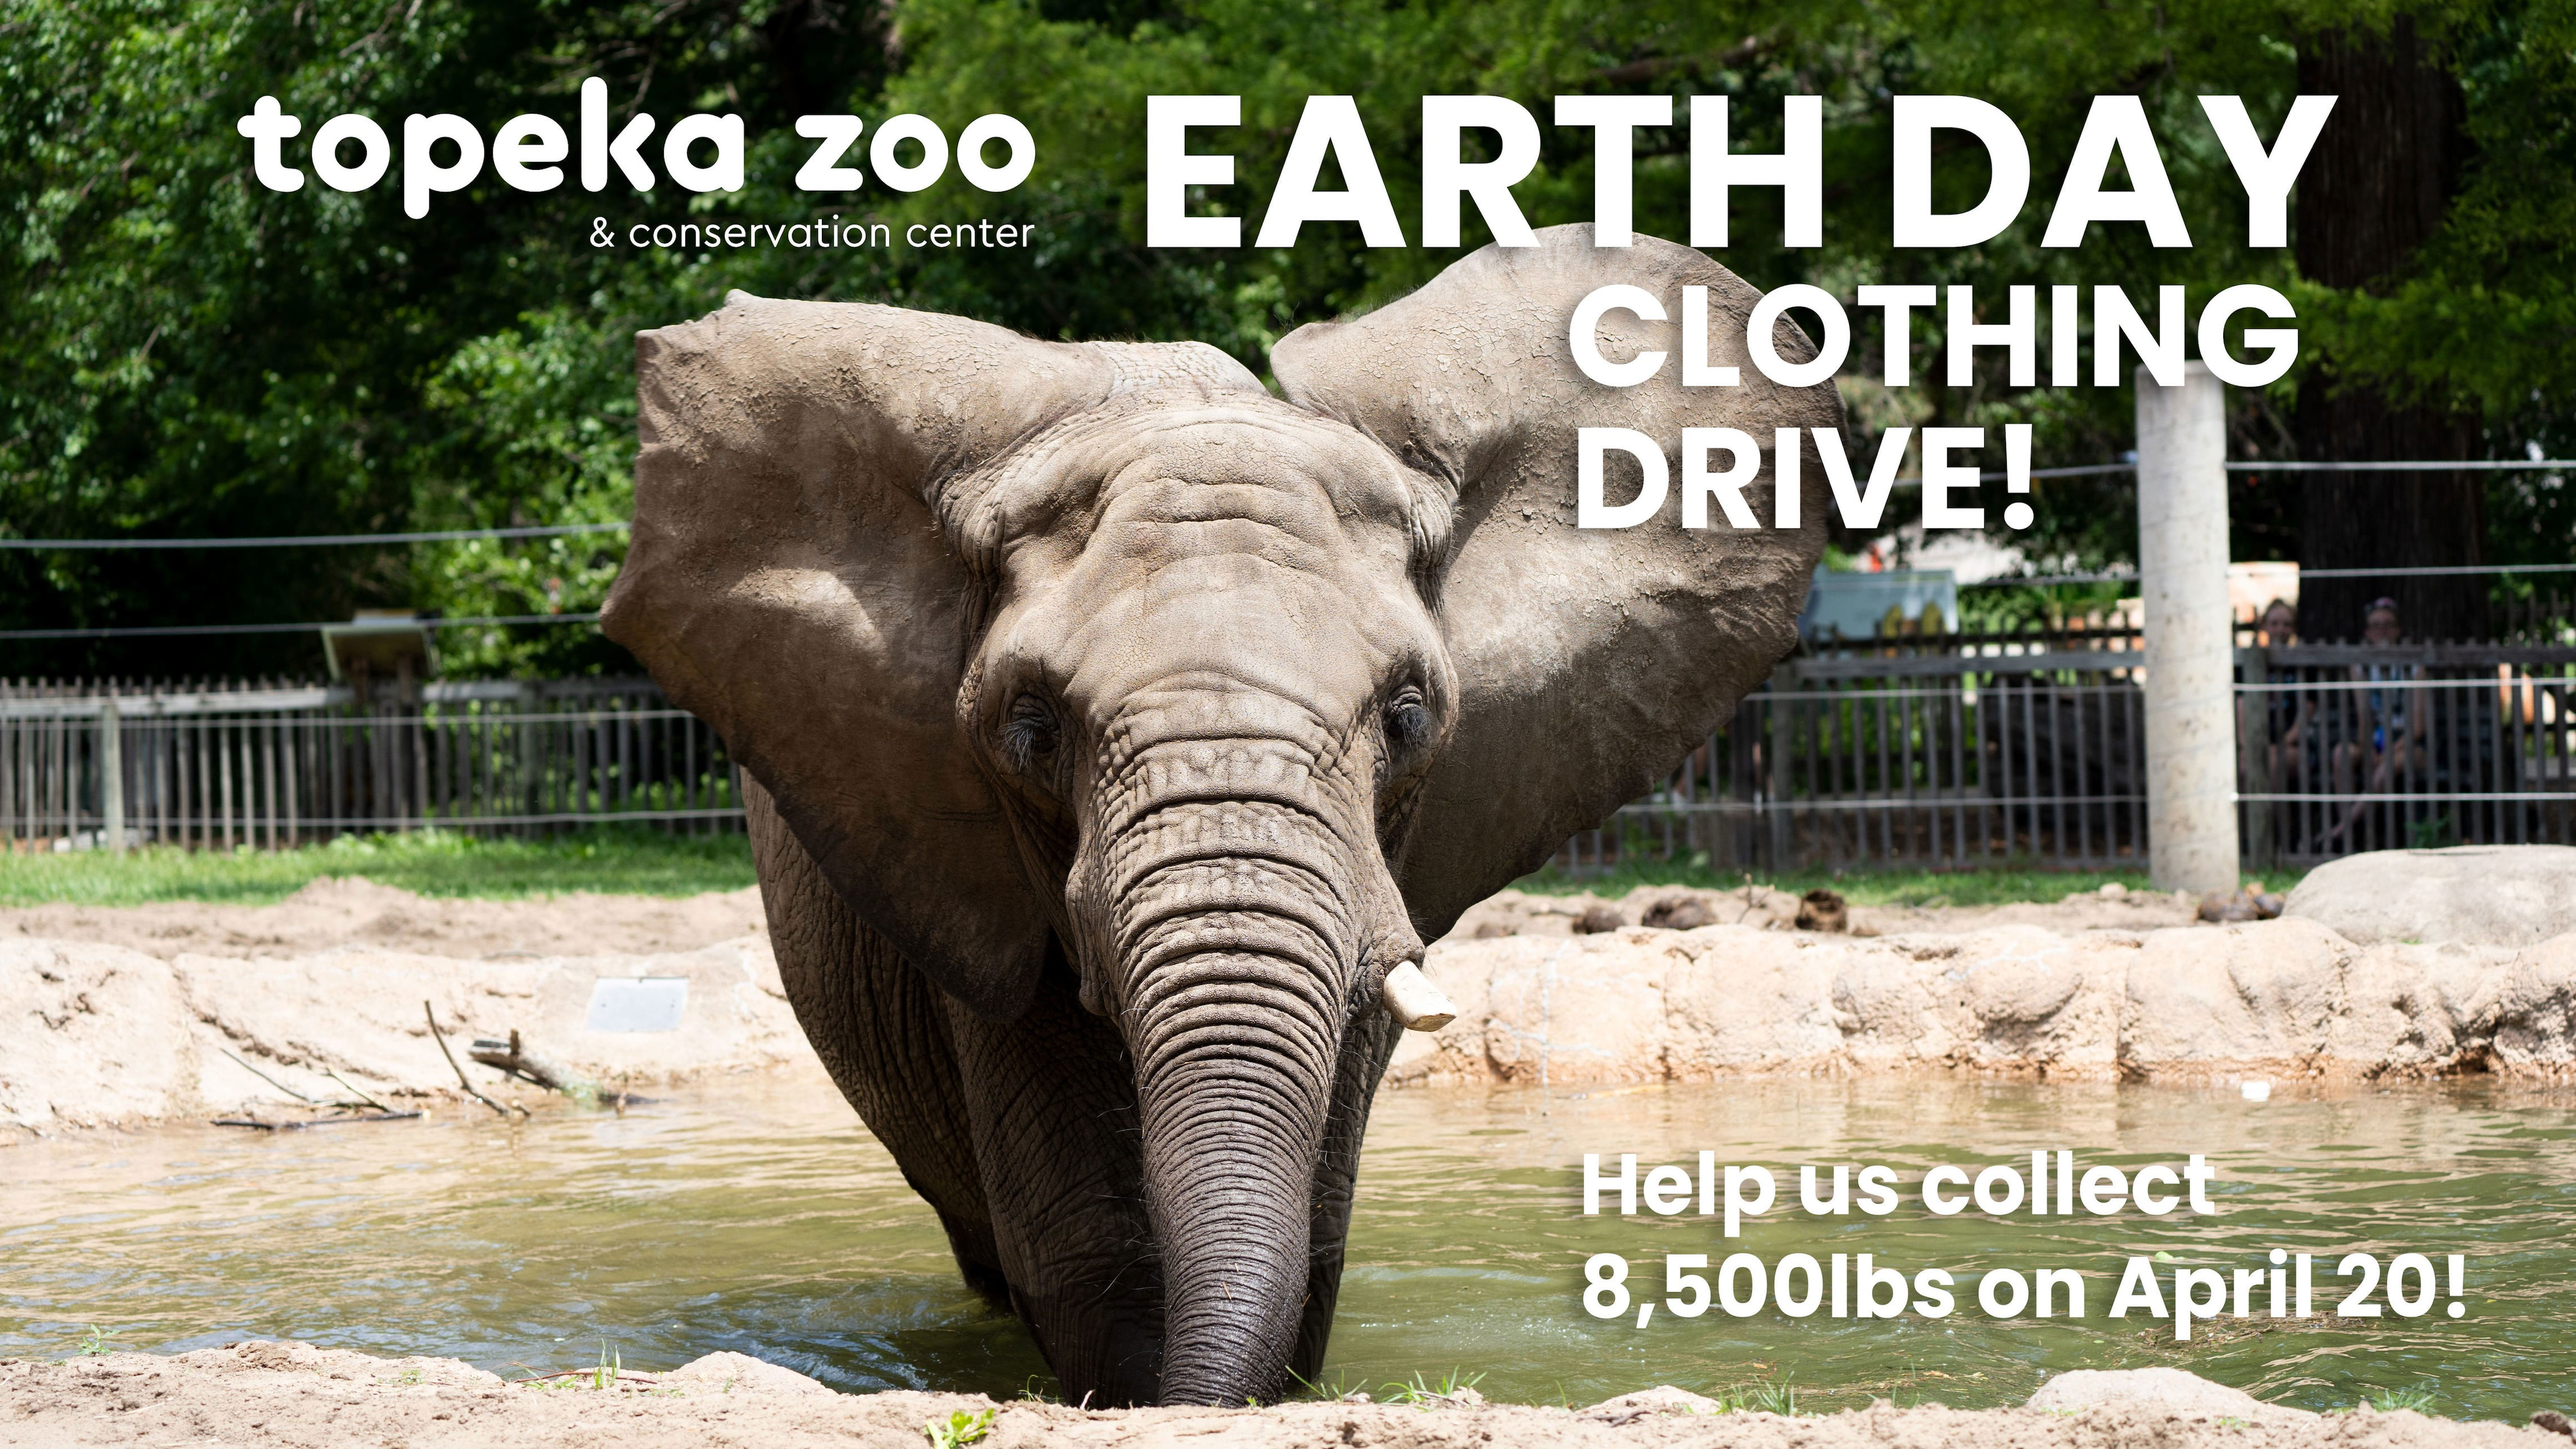 Topeka Zoo excited for upcoming, elephant-sized clothing drive